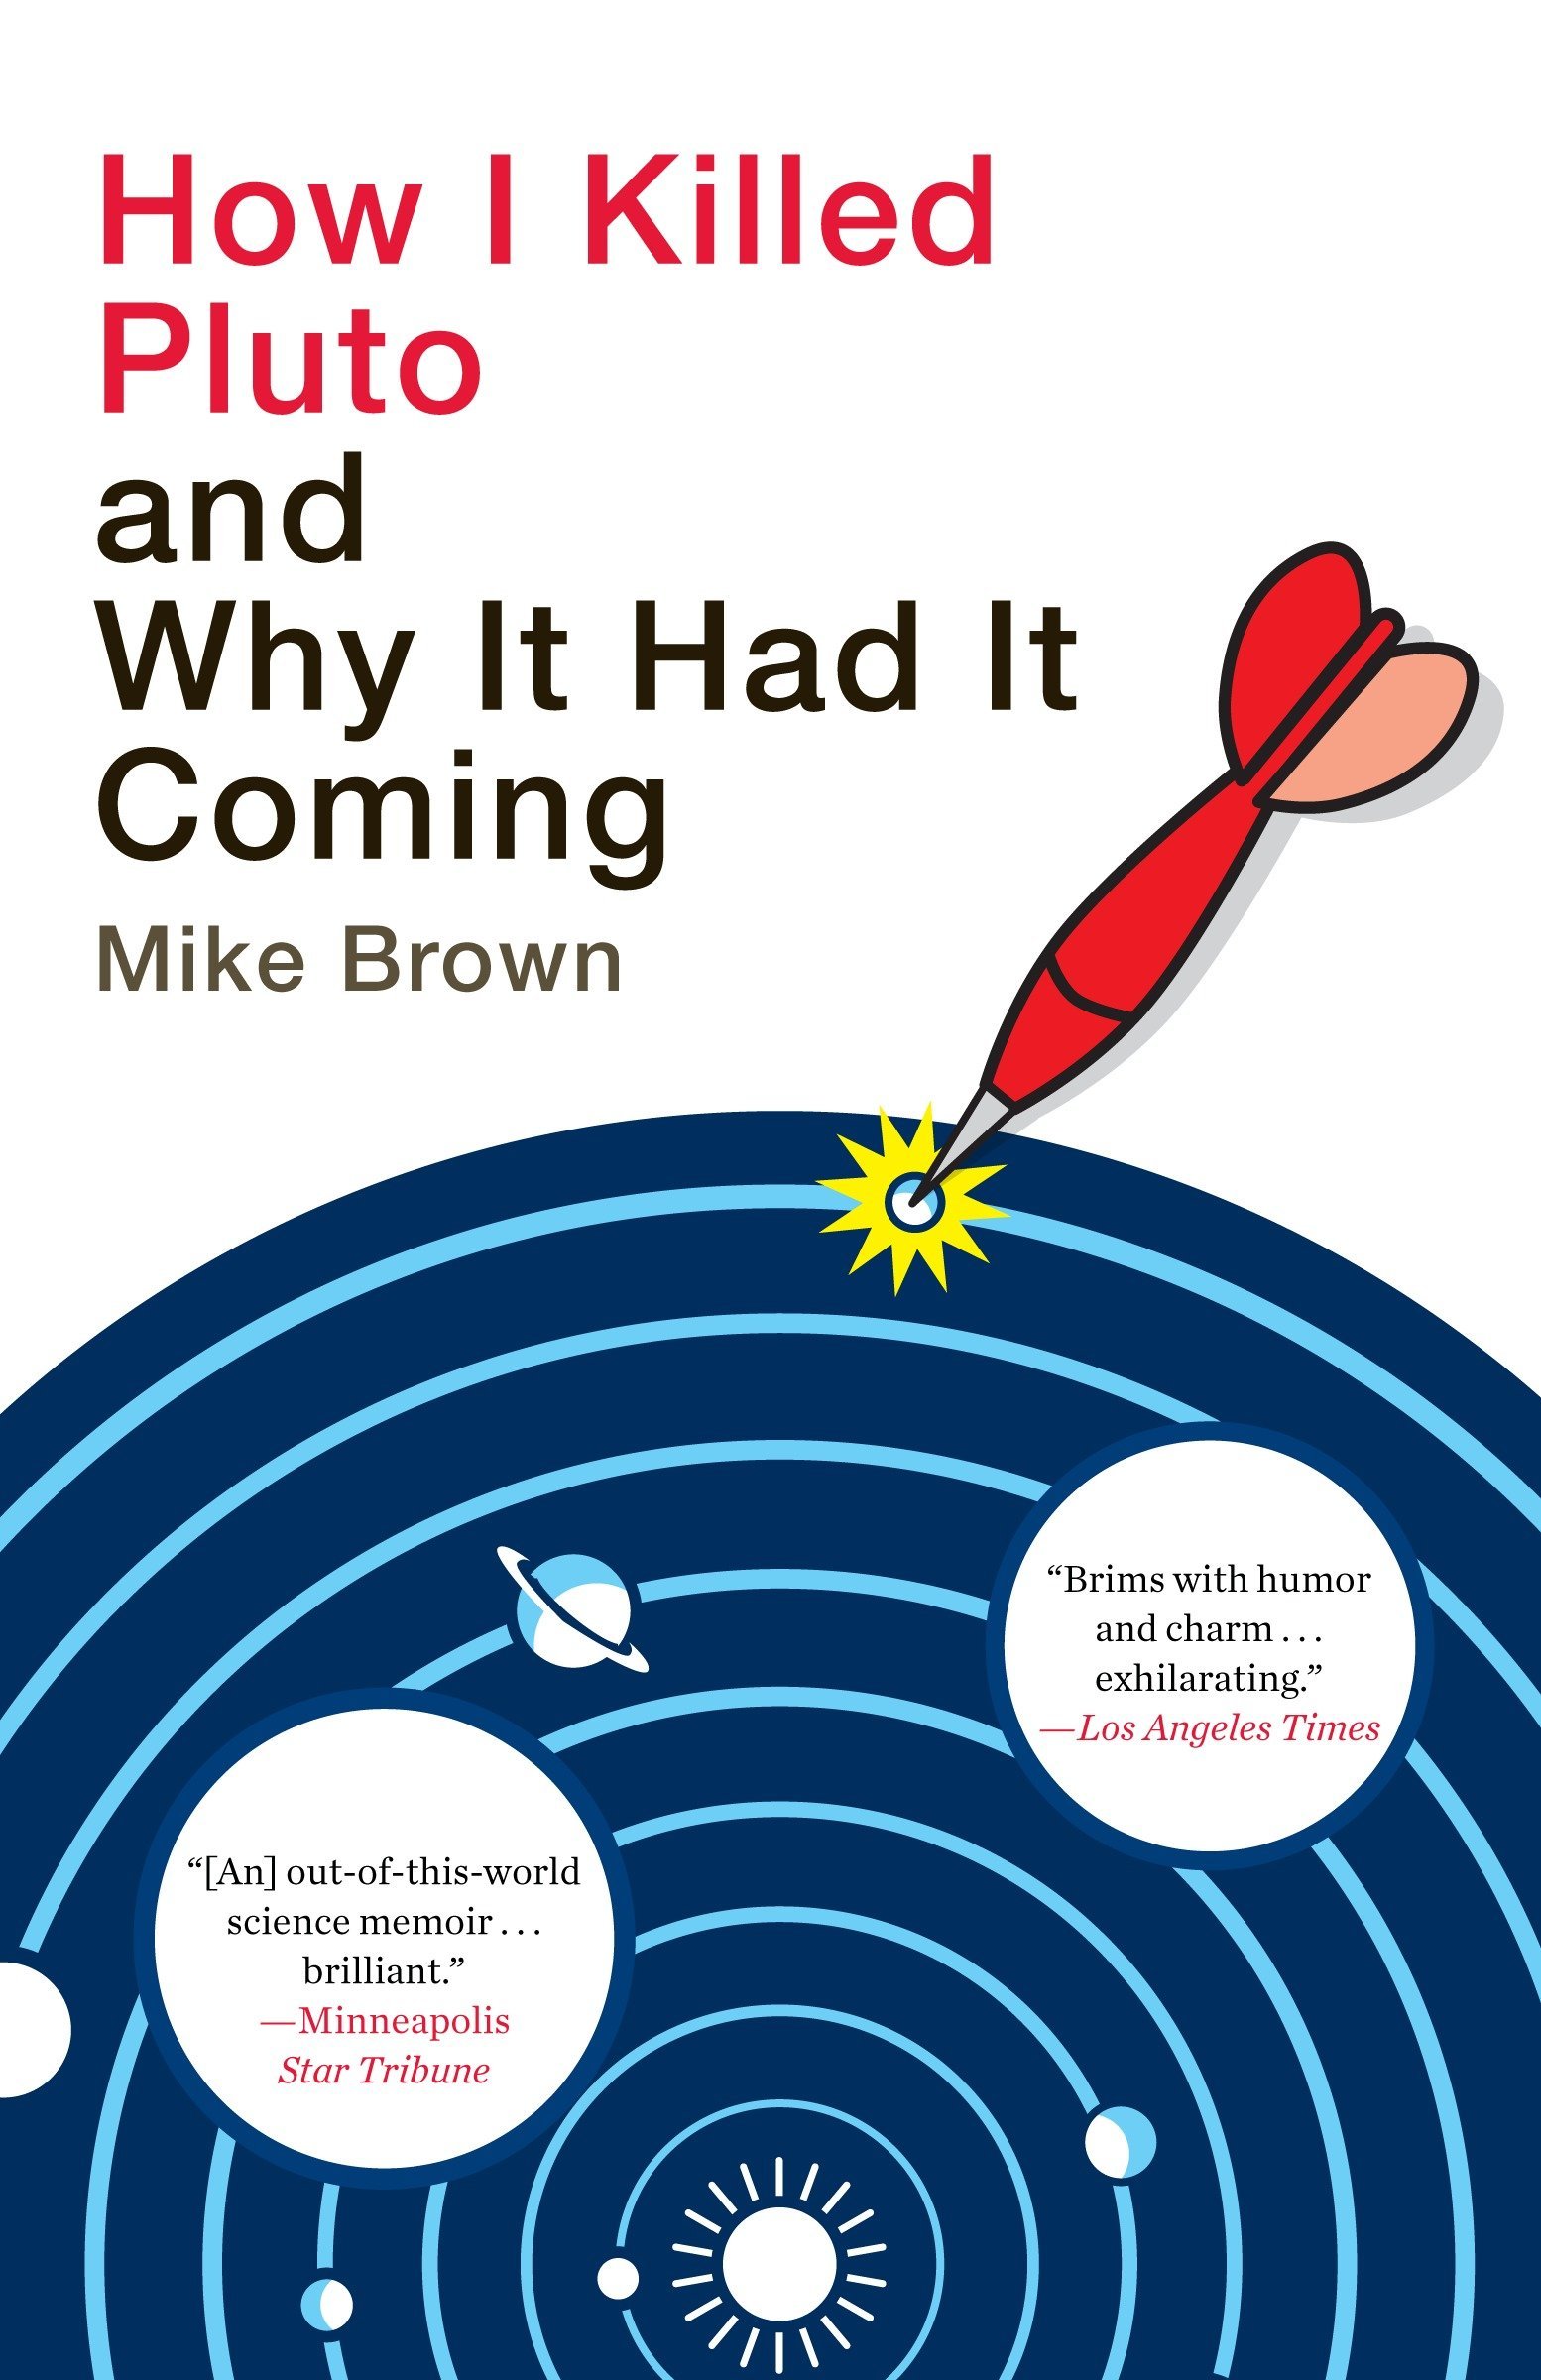 Mike Brown: How I Killed Pluto and Why It Had It Coming (2010, Spiegel & Grau)